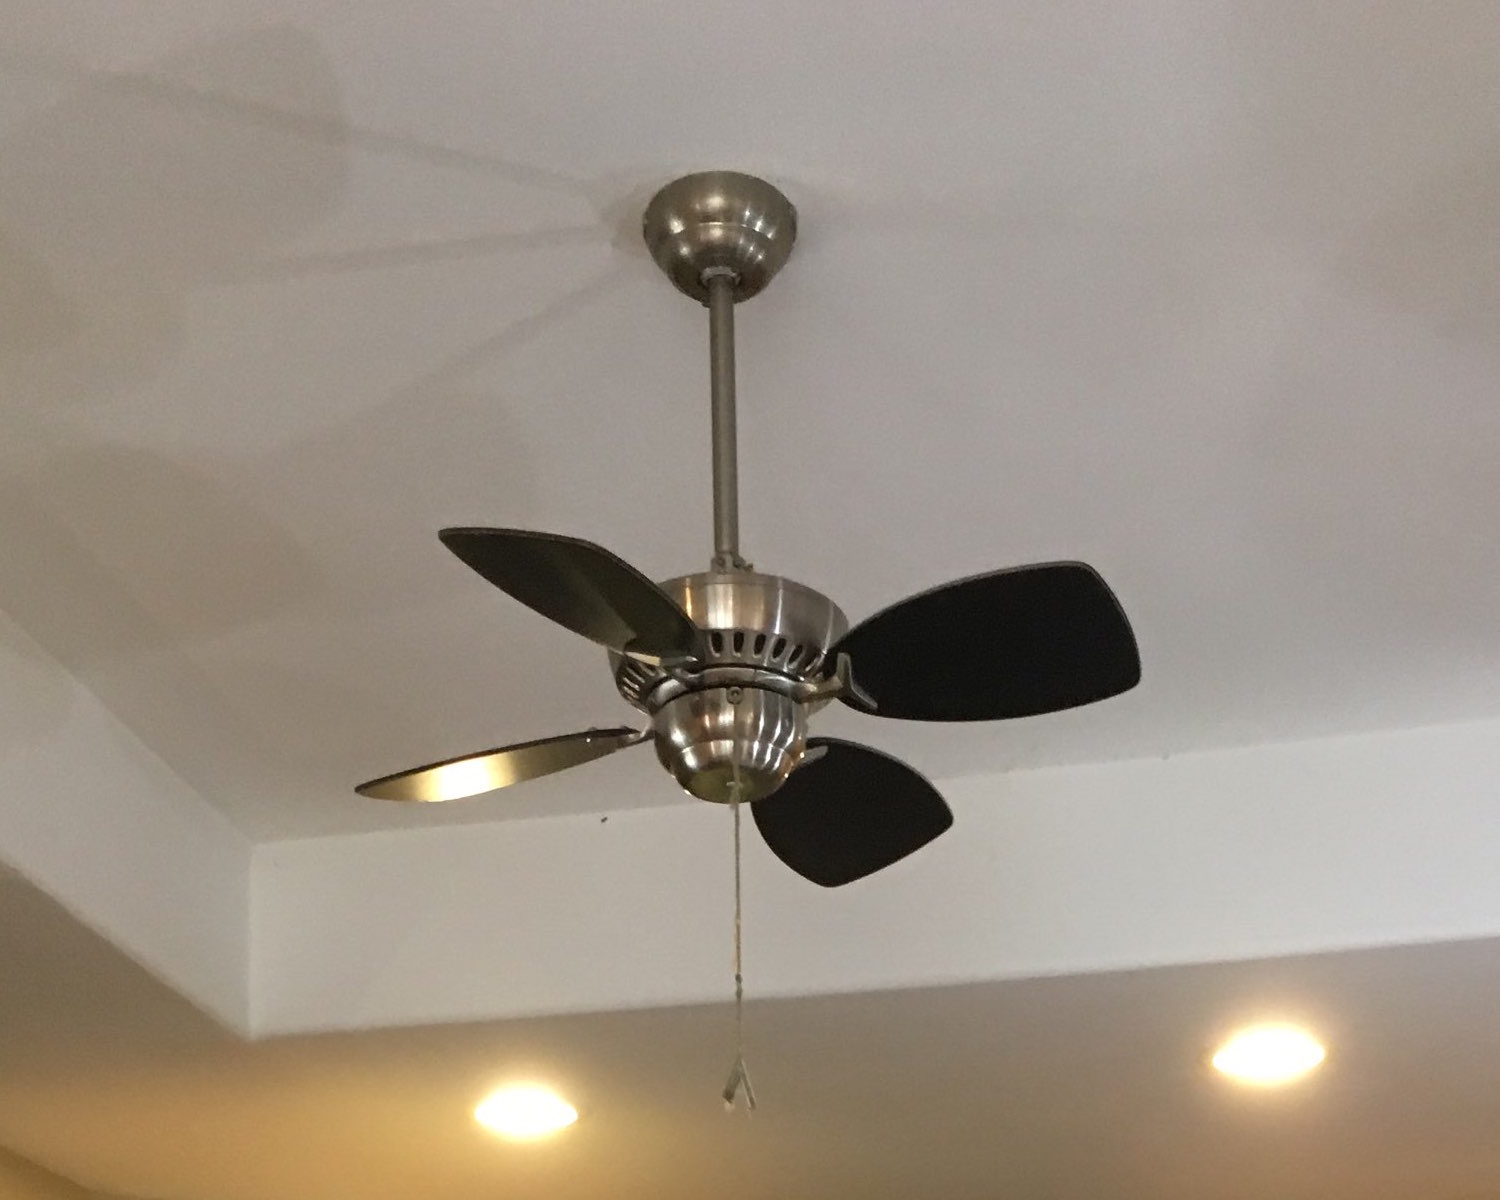 Ceiling Fans, Basement Ceiling Fan Direction For Summer With Air Conditioning